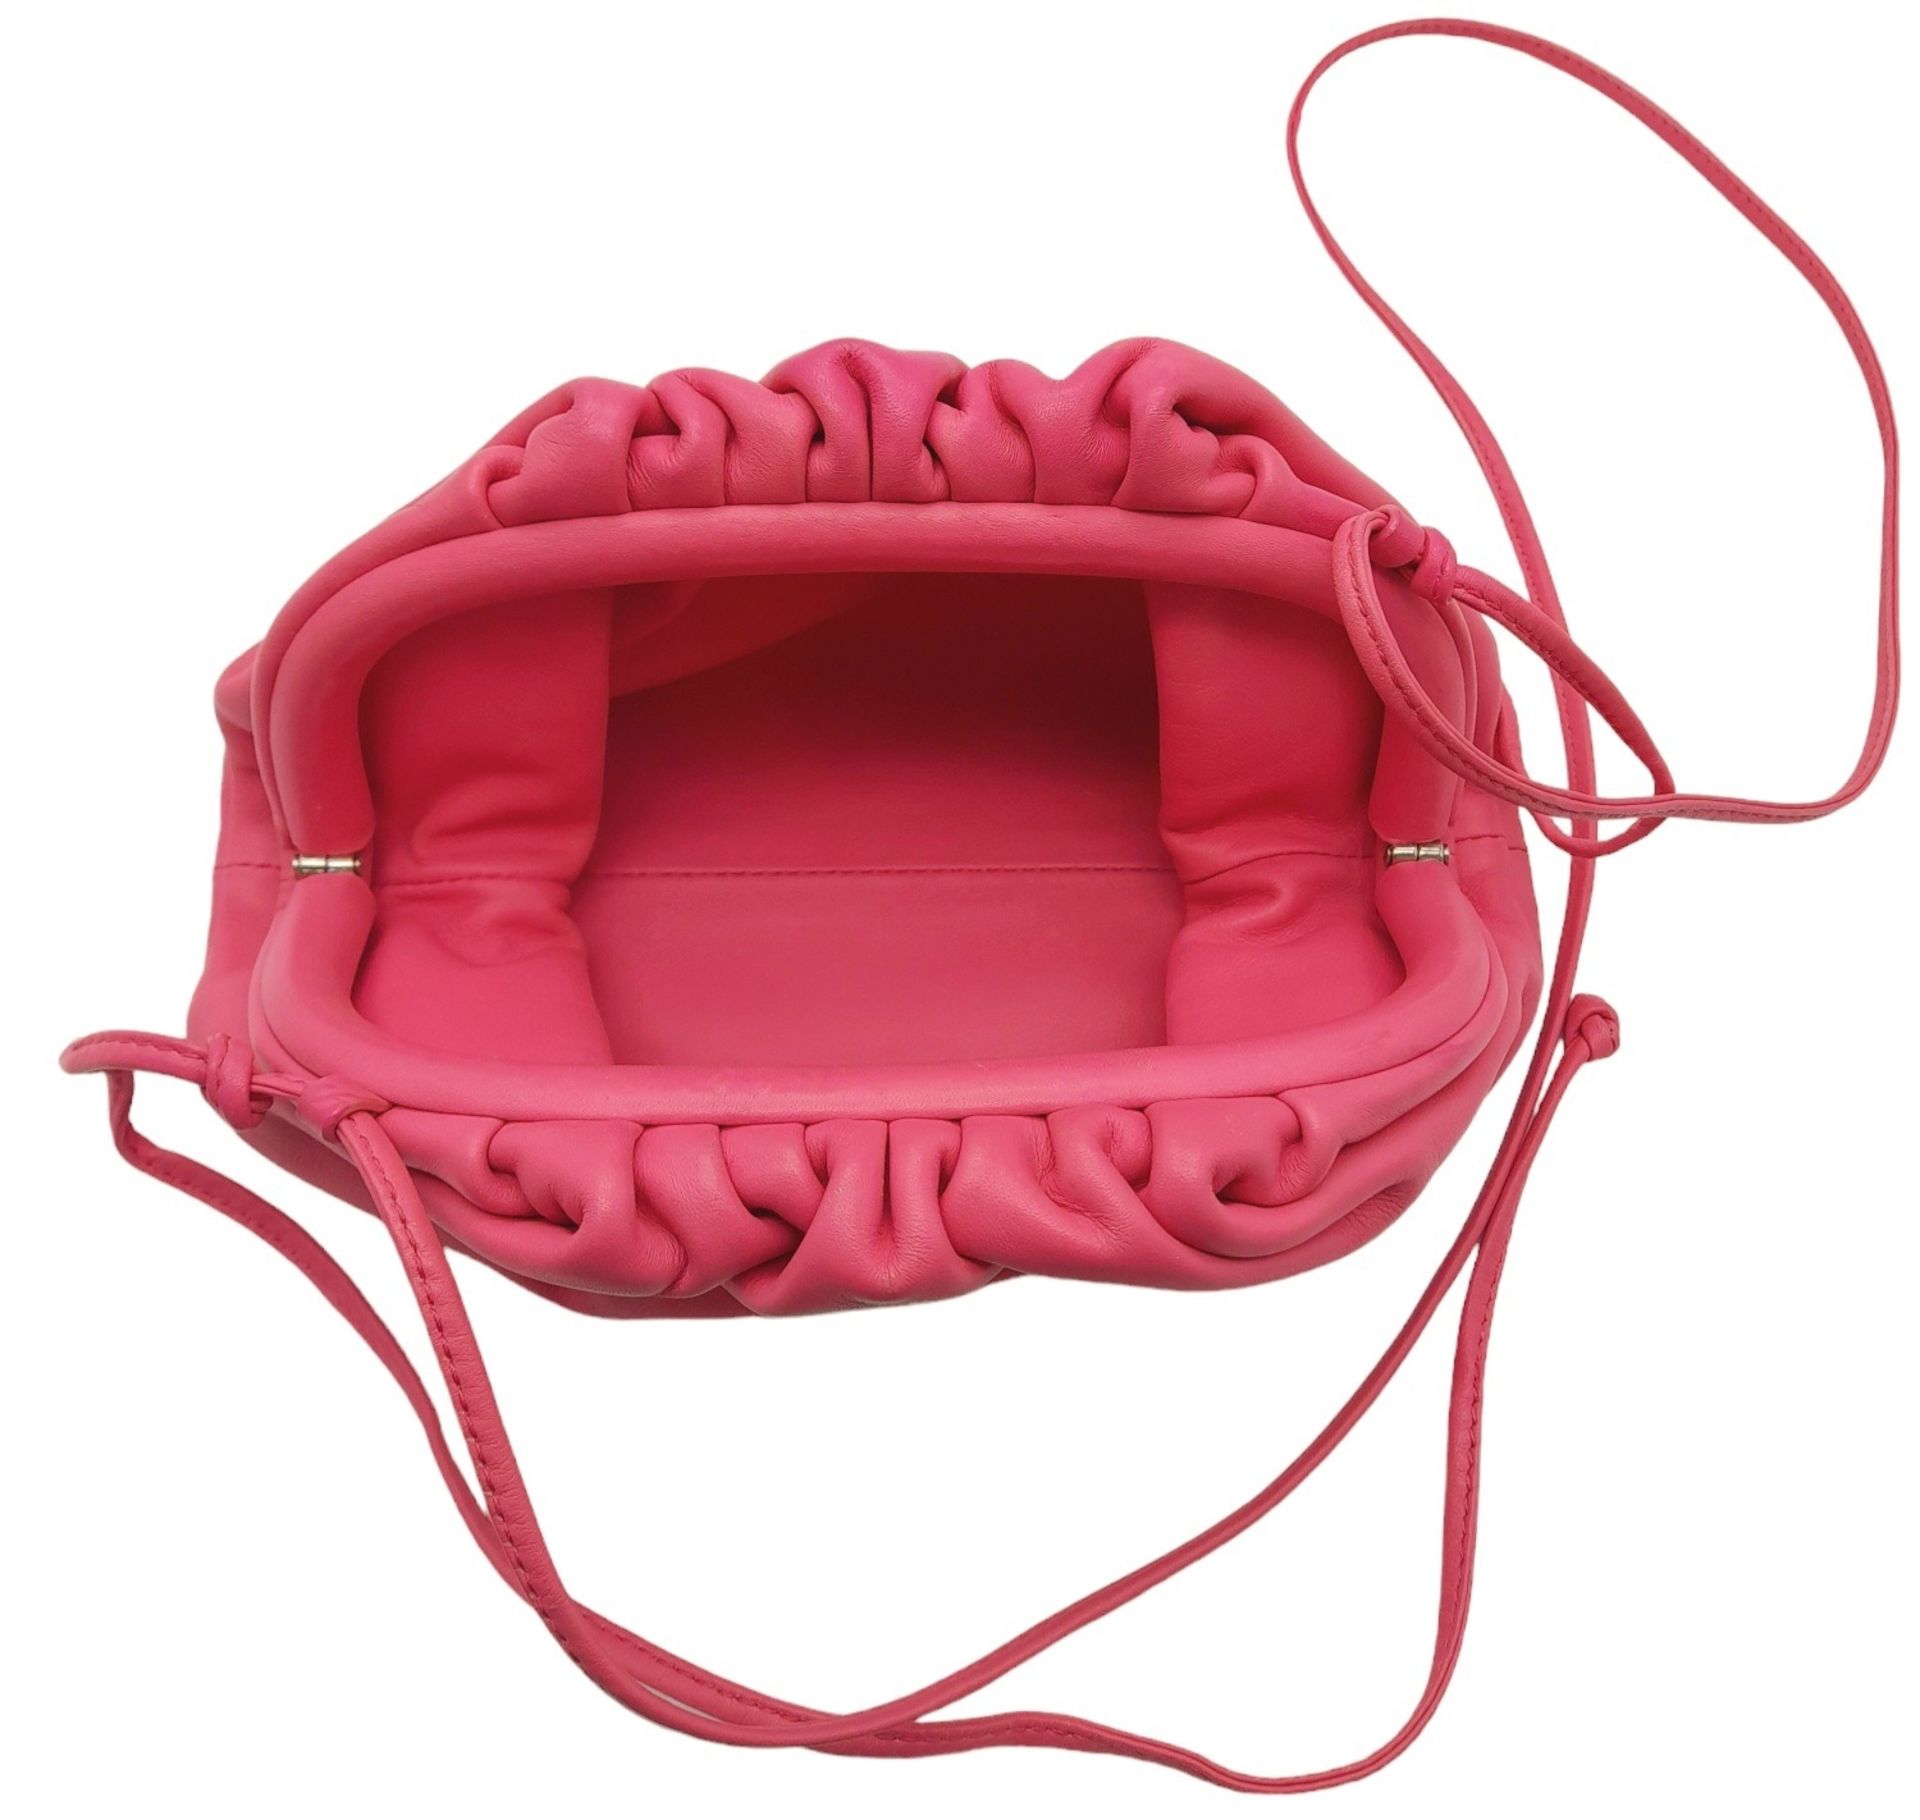 A Bottega Veneta Pink Mini Pouch Bag. Leather exterior with thin strap and magnetic closure. Pink - Image 4 of 9